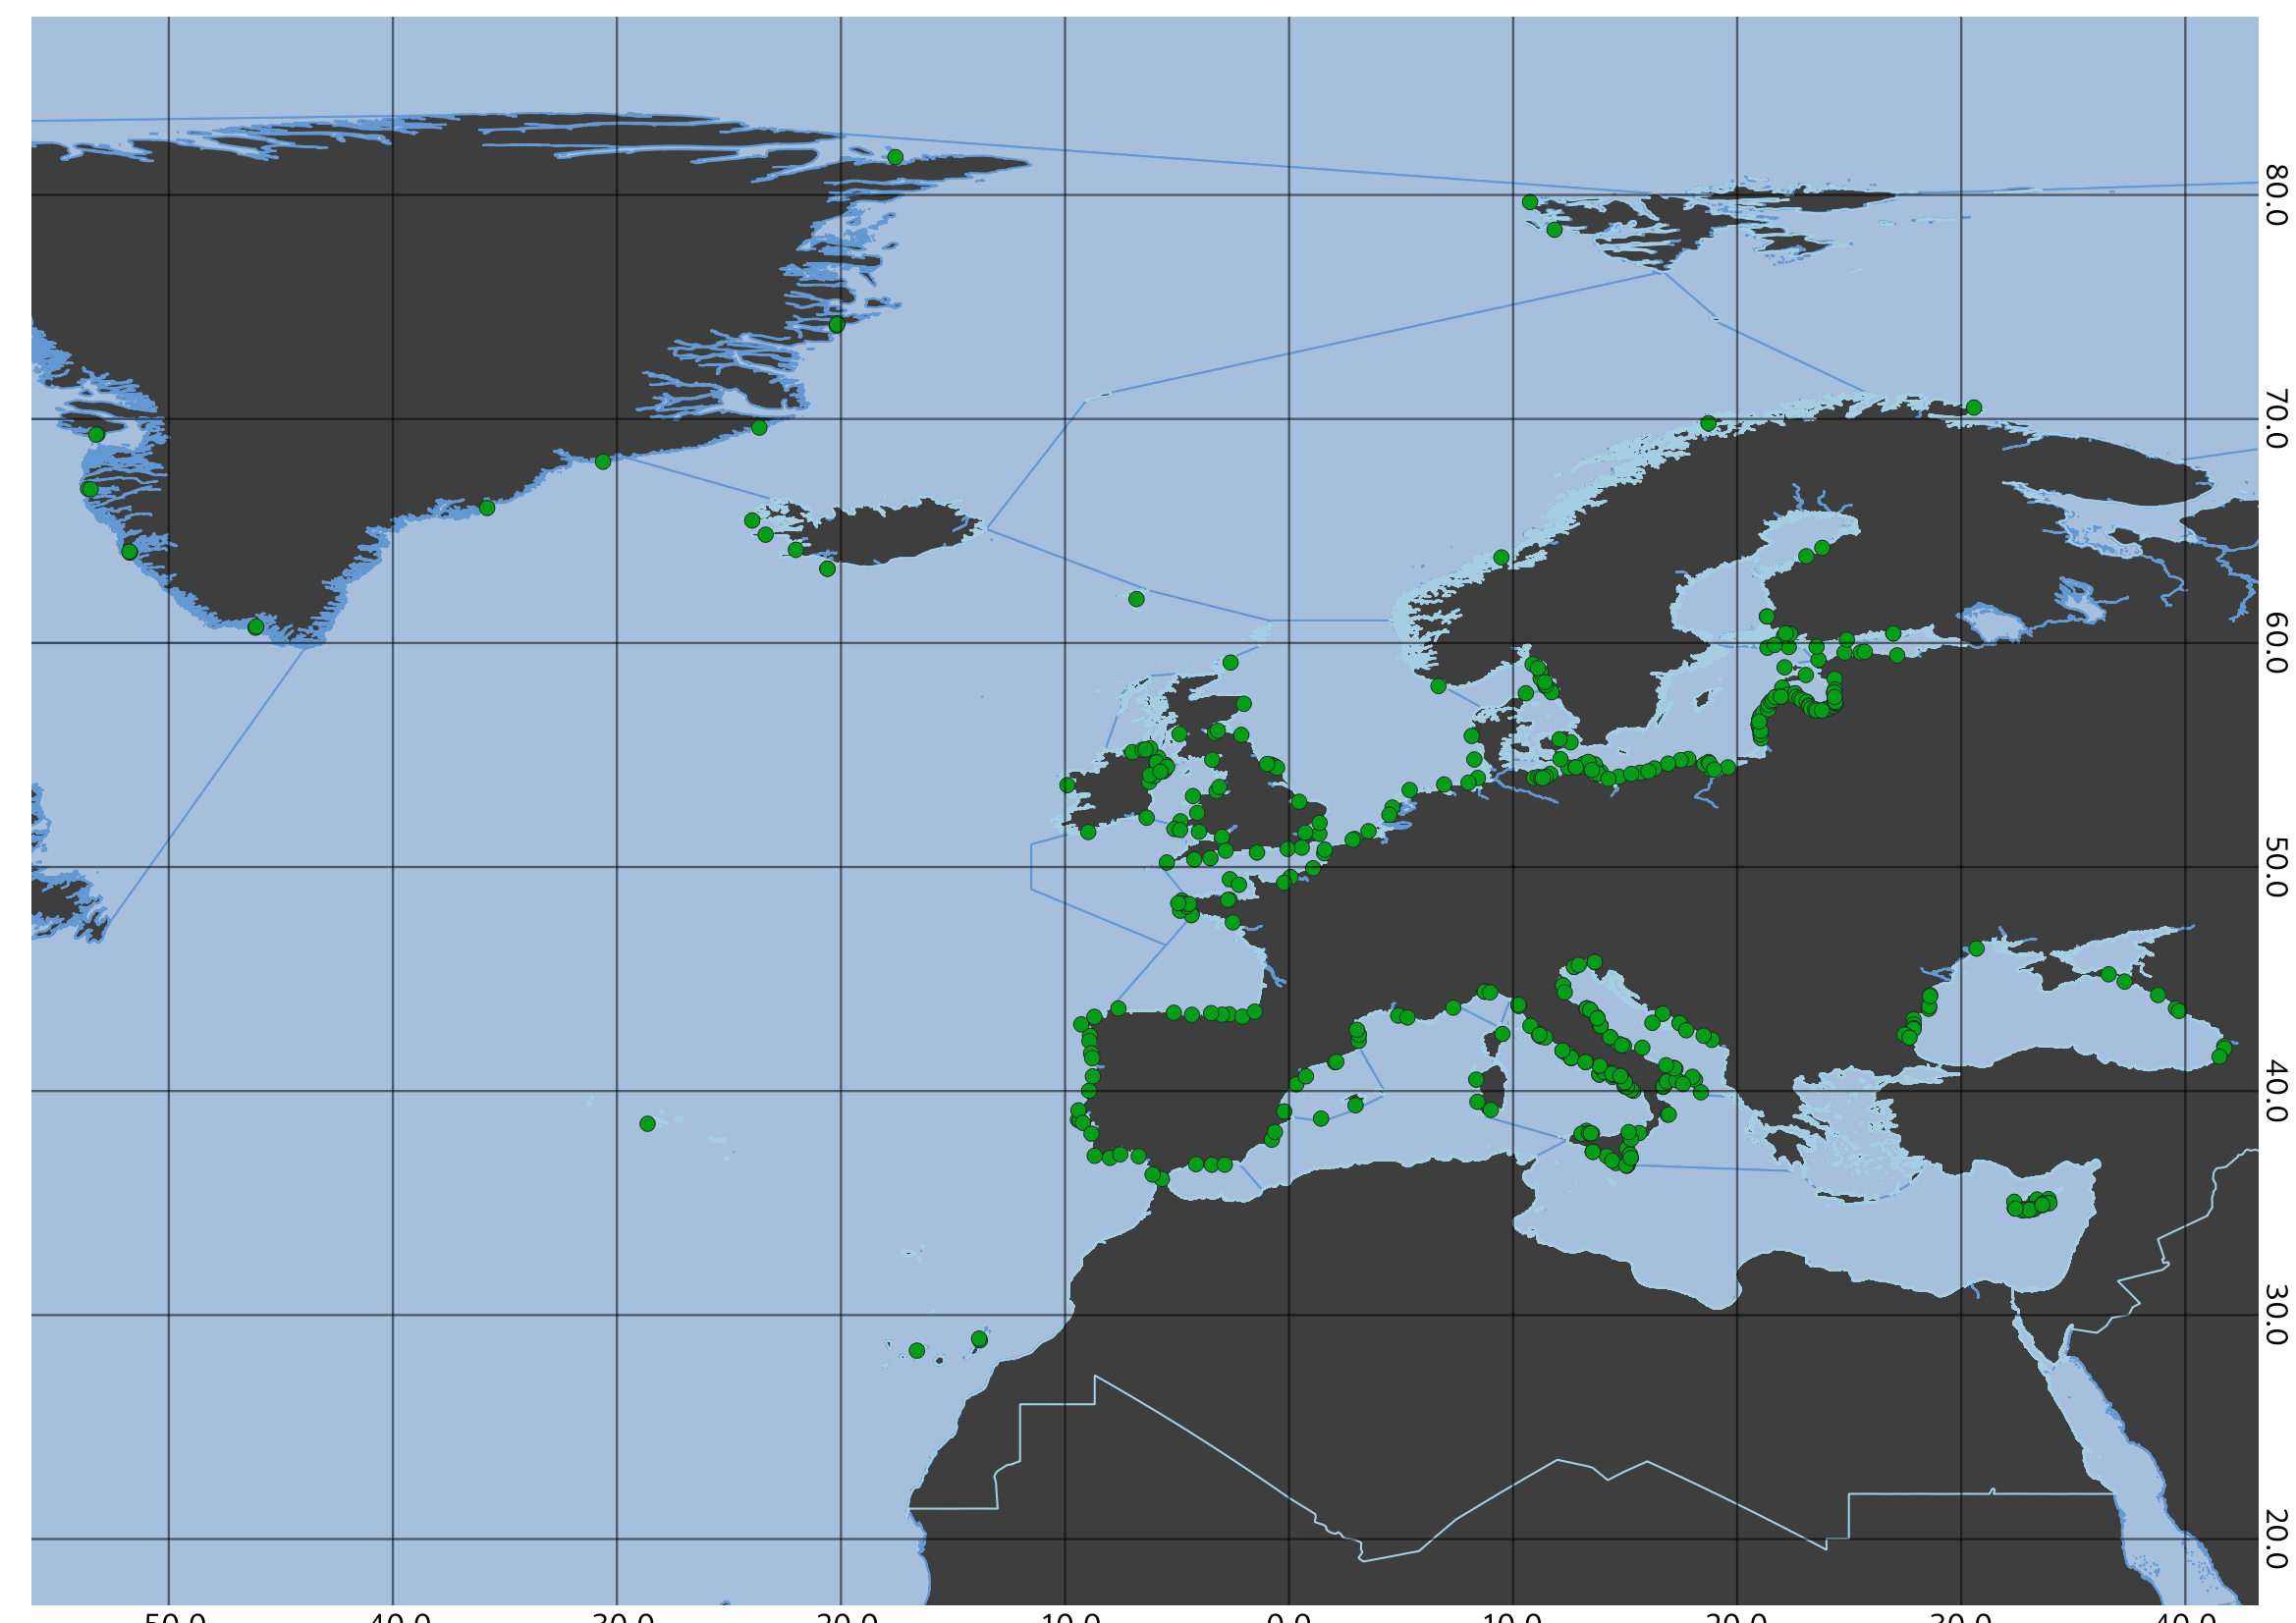 https://sextant.ifremer.fr/geonetwork/srv/api/records/1a4f994d-ec80-46fe-9e28-f27cca4a1006/attachments/Sextant_map_beach_unrestricted_190517.png